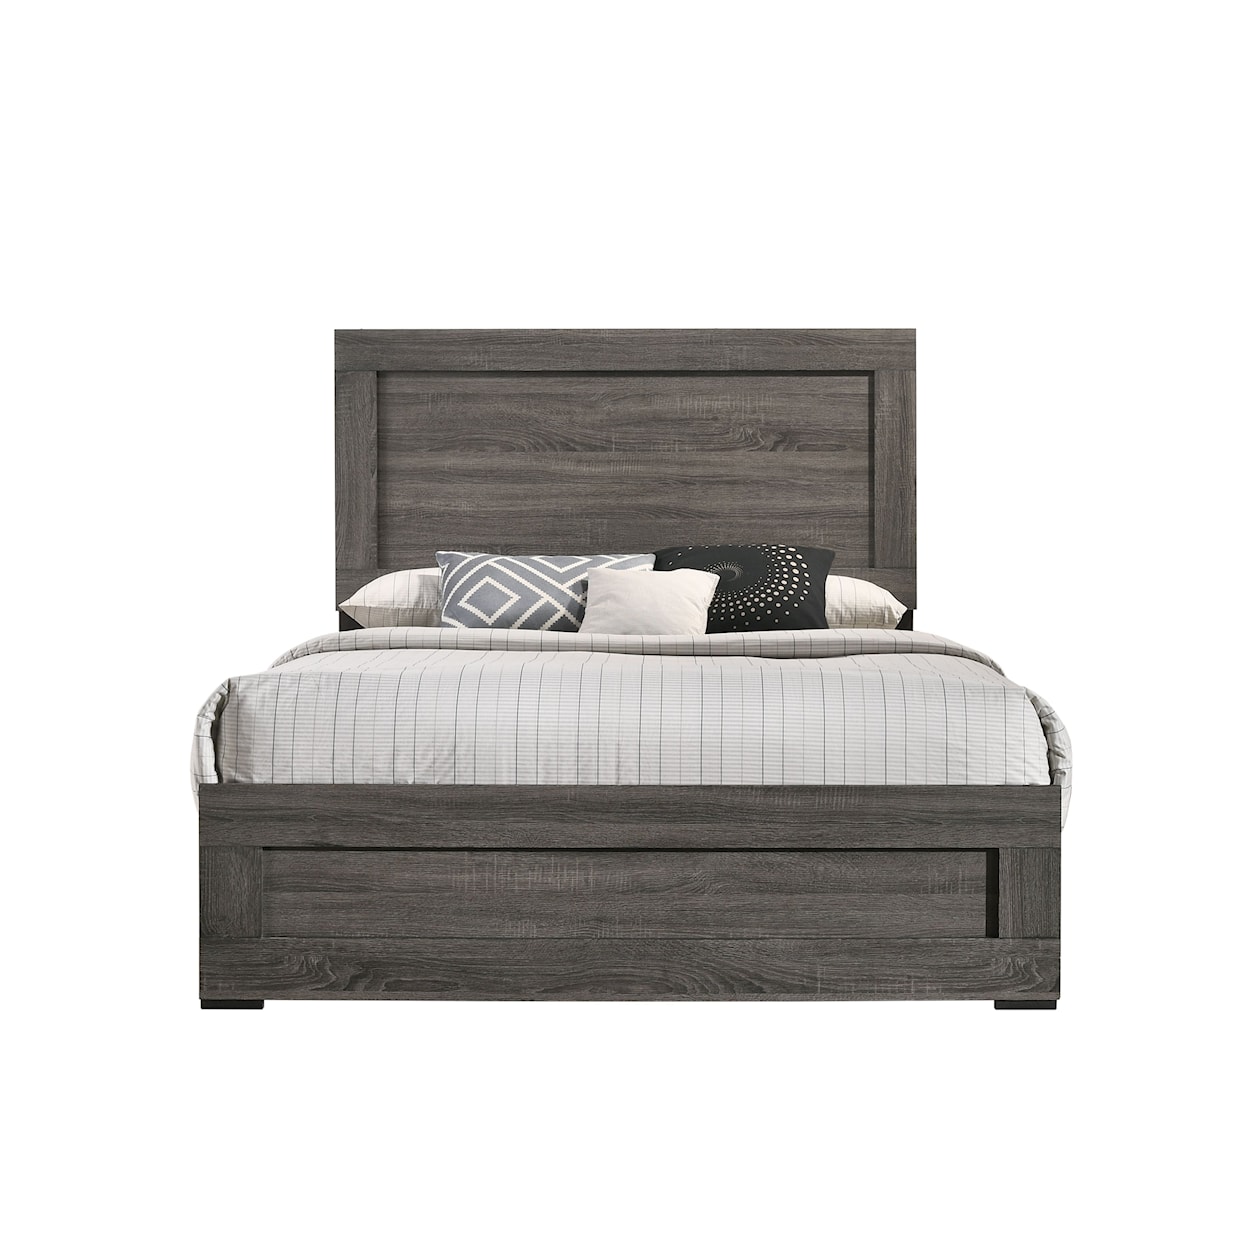 Lifestyle 8321A Queen Bed